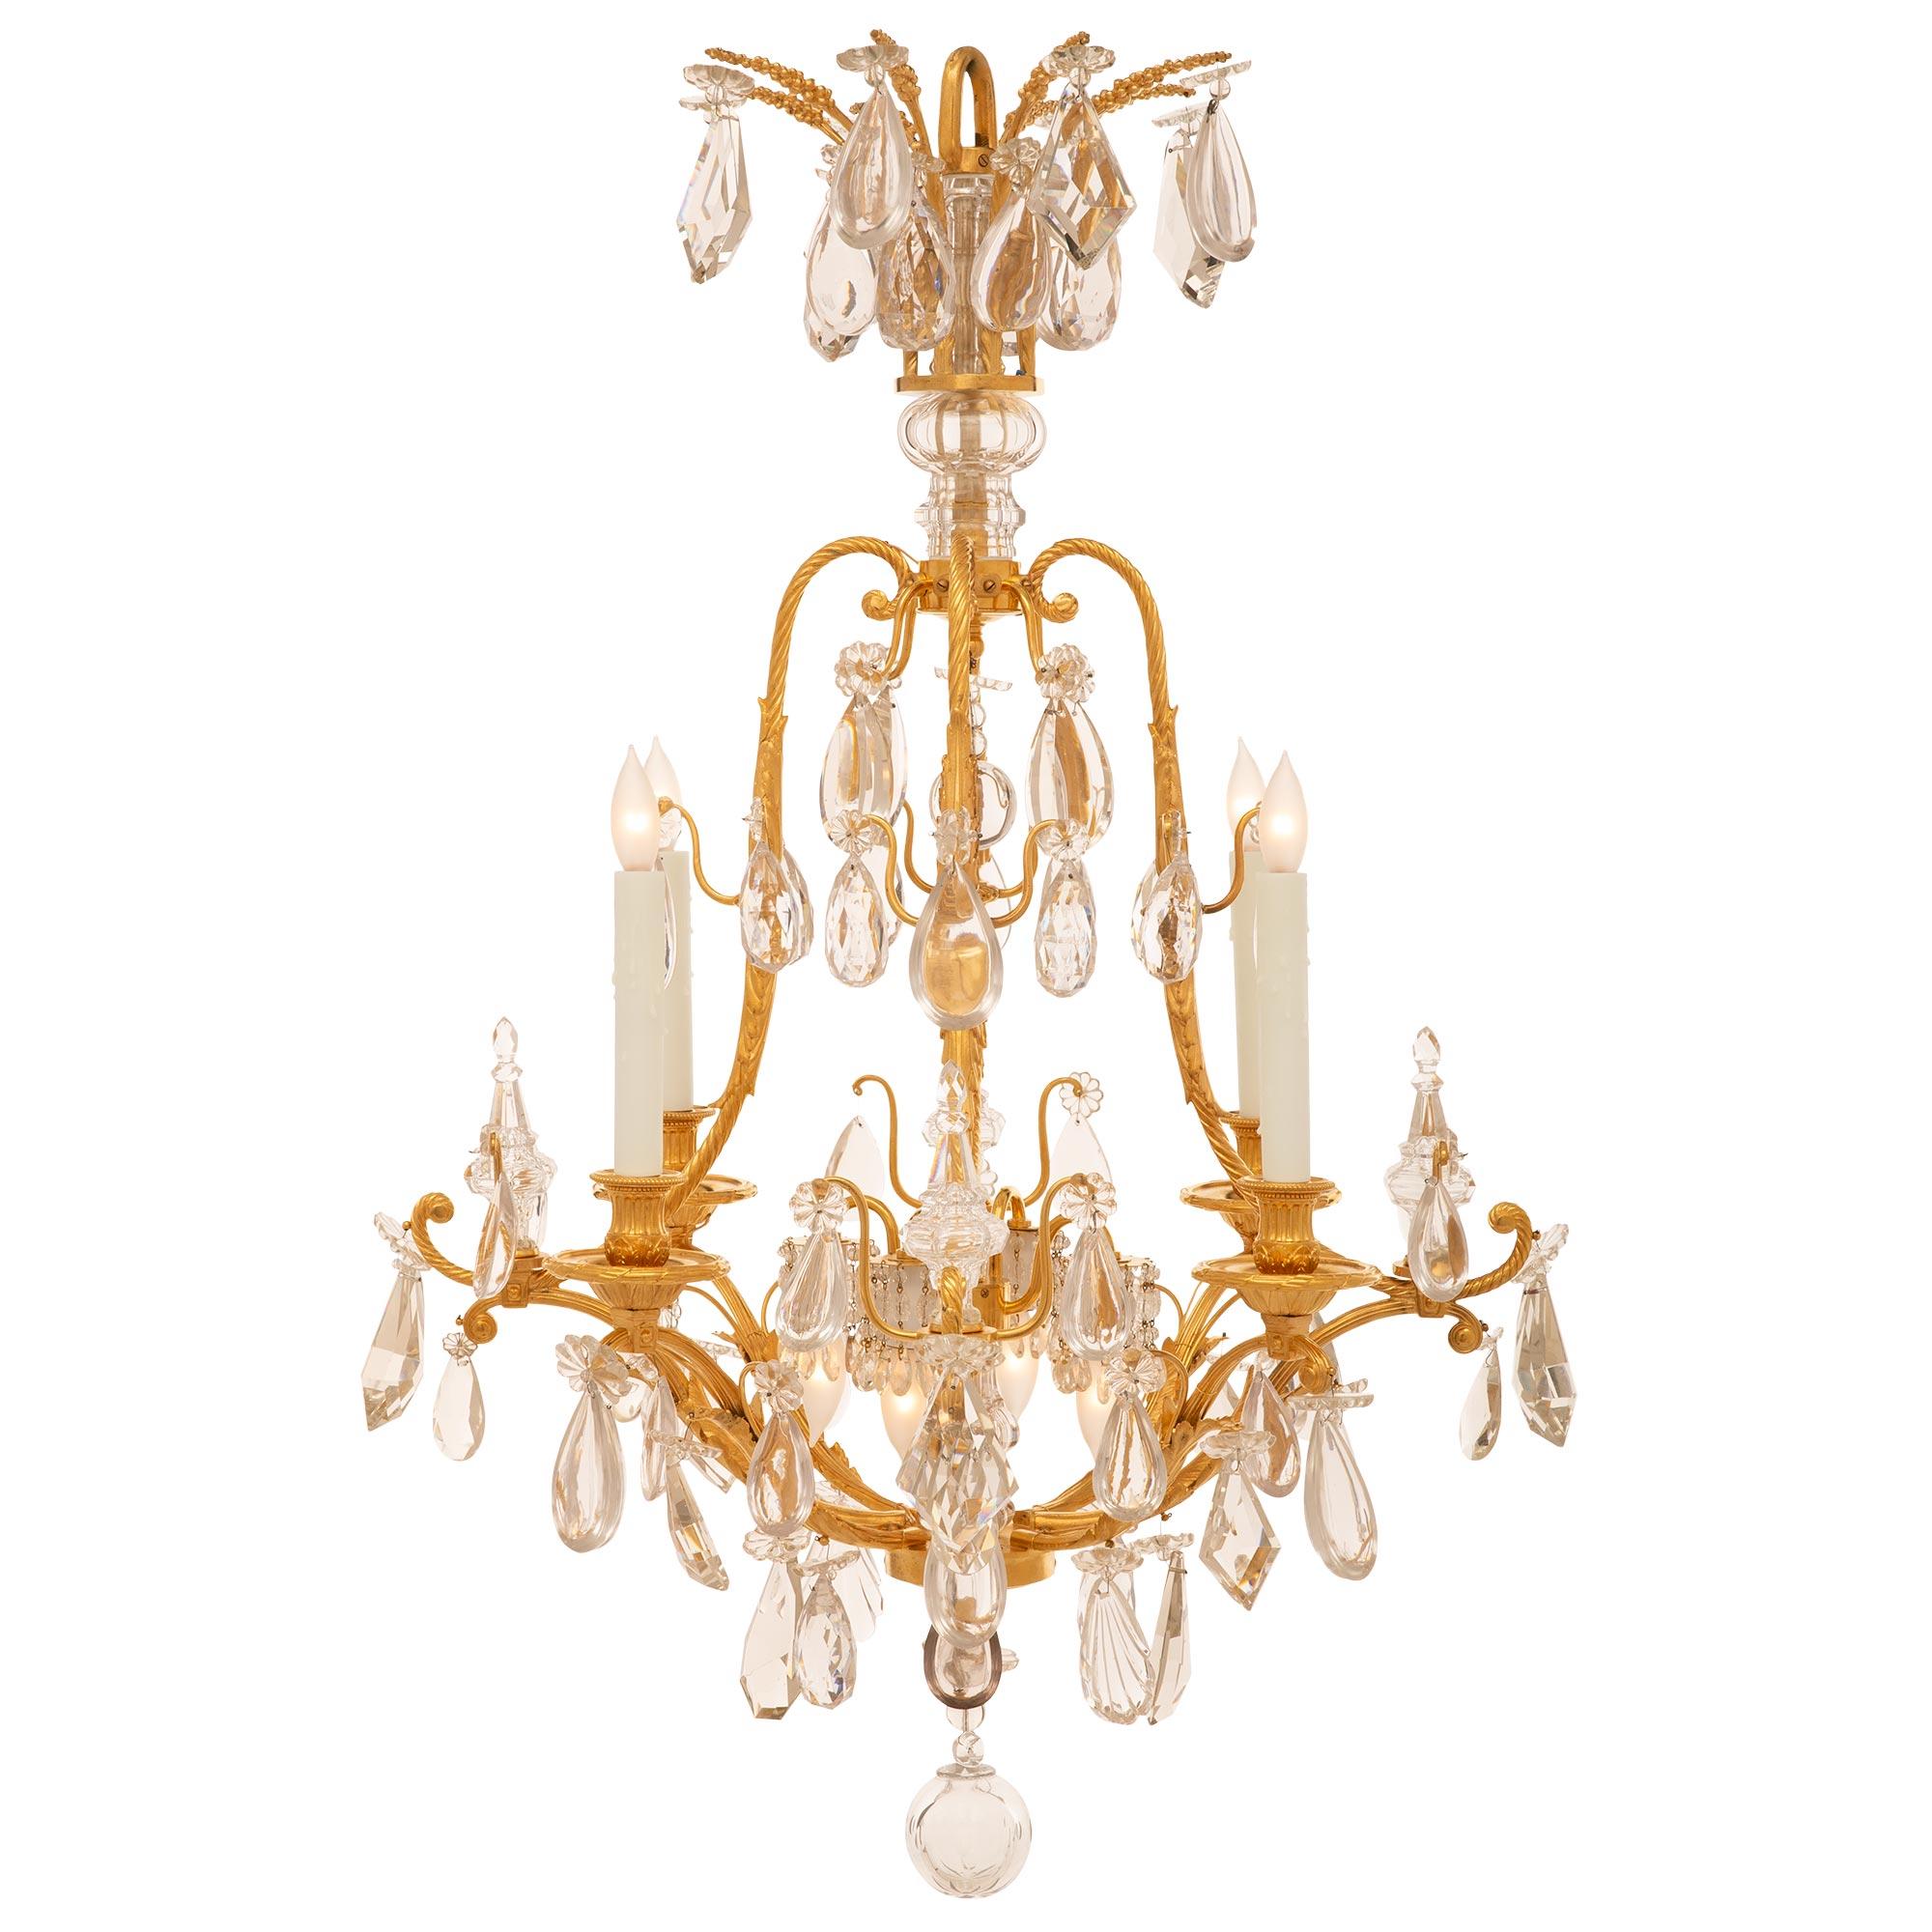 A stunning French 19th century Louis XVI st. Belle Époque period ormolu and Baccarat crystal chandelier. The four arm eight light chandelier is centered by an elegant bottom crystal ball amidst an exceptional array of seashell, teardrop, and kite